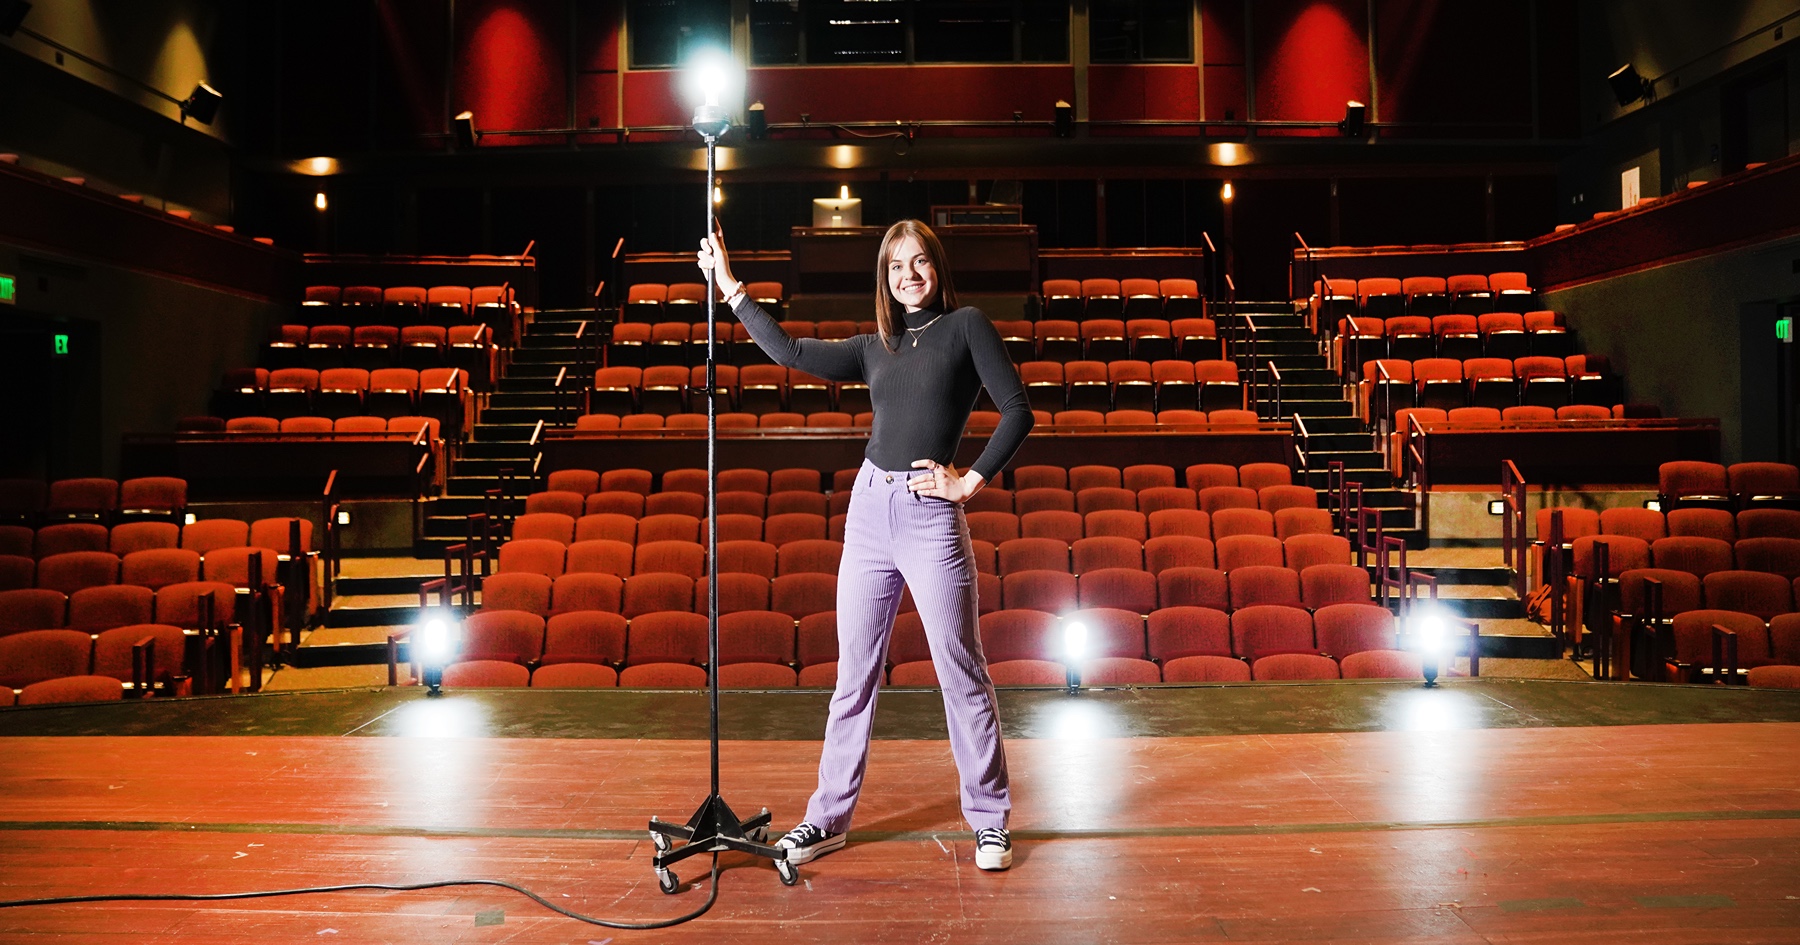 Renee Bippus stands on stage at Purdue